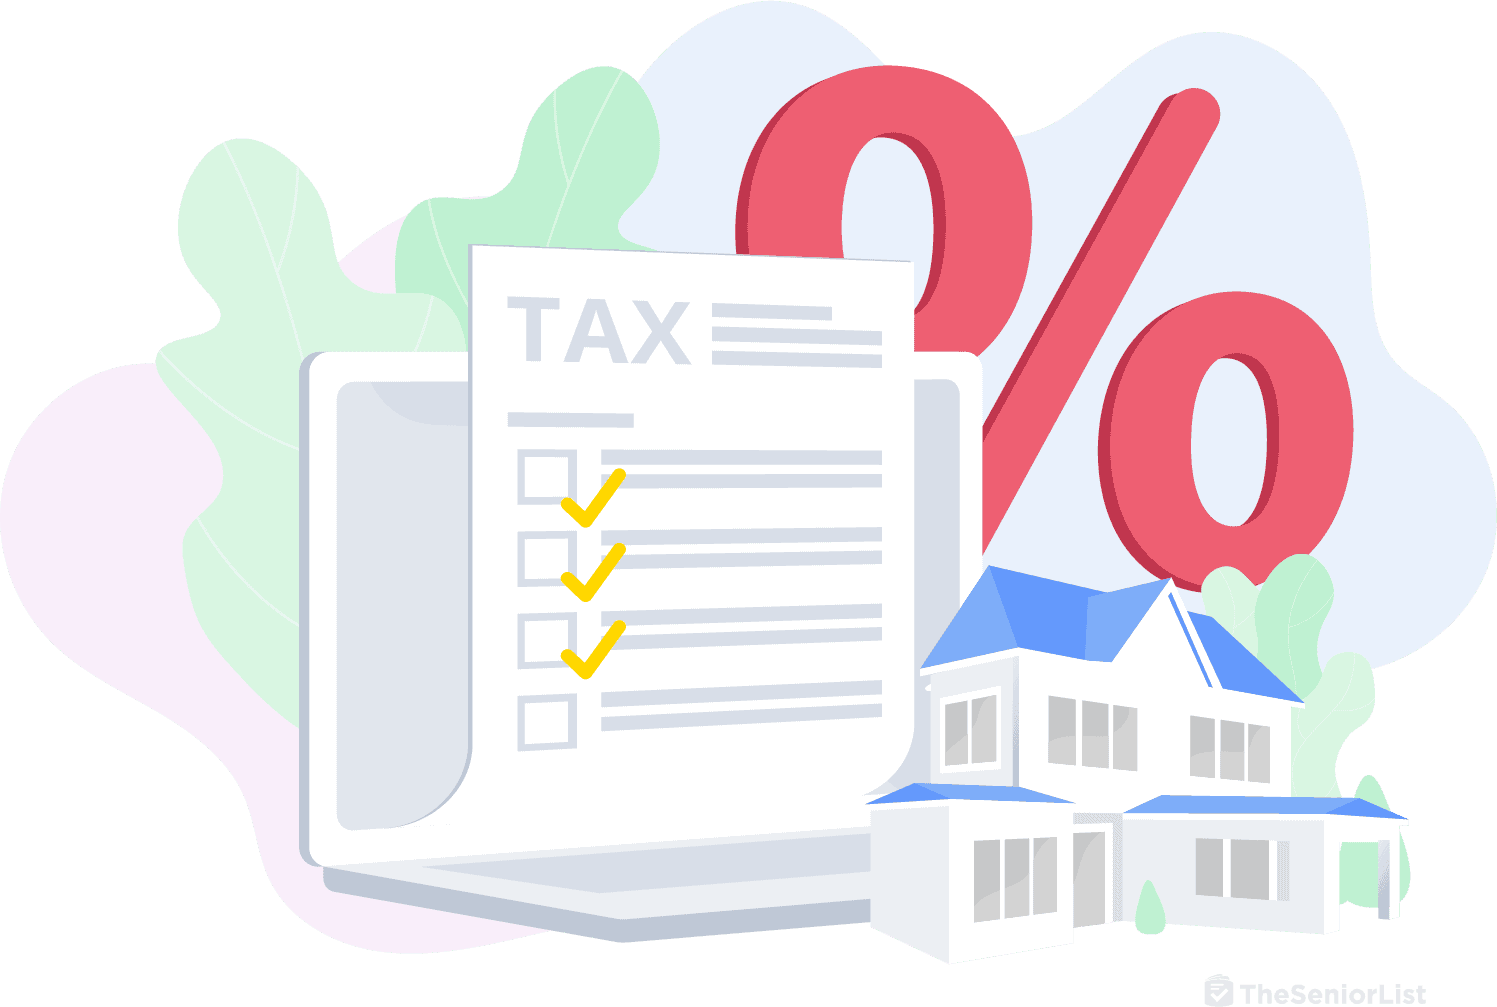 Remember to think about taxes when planning your estate.